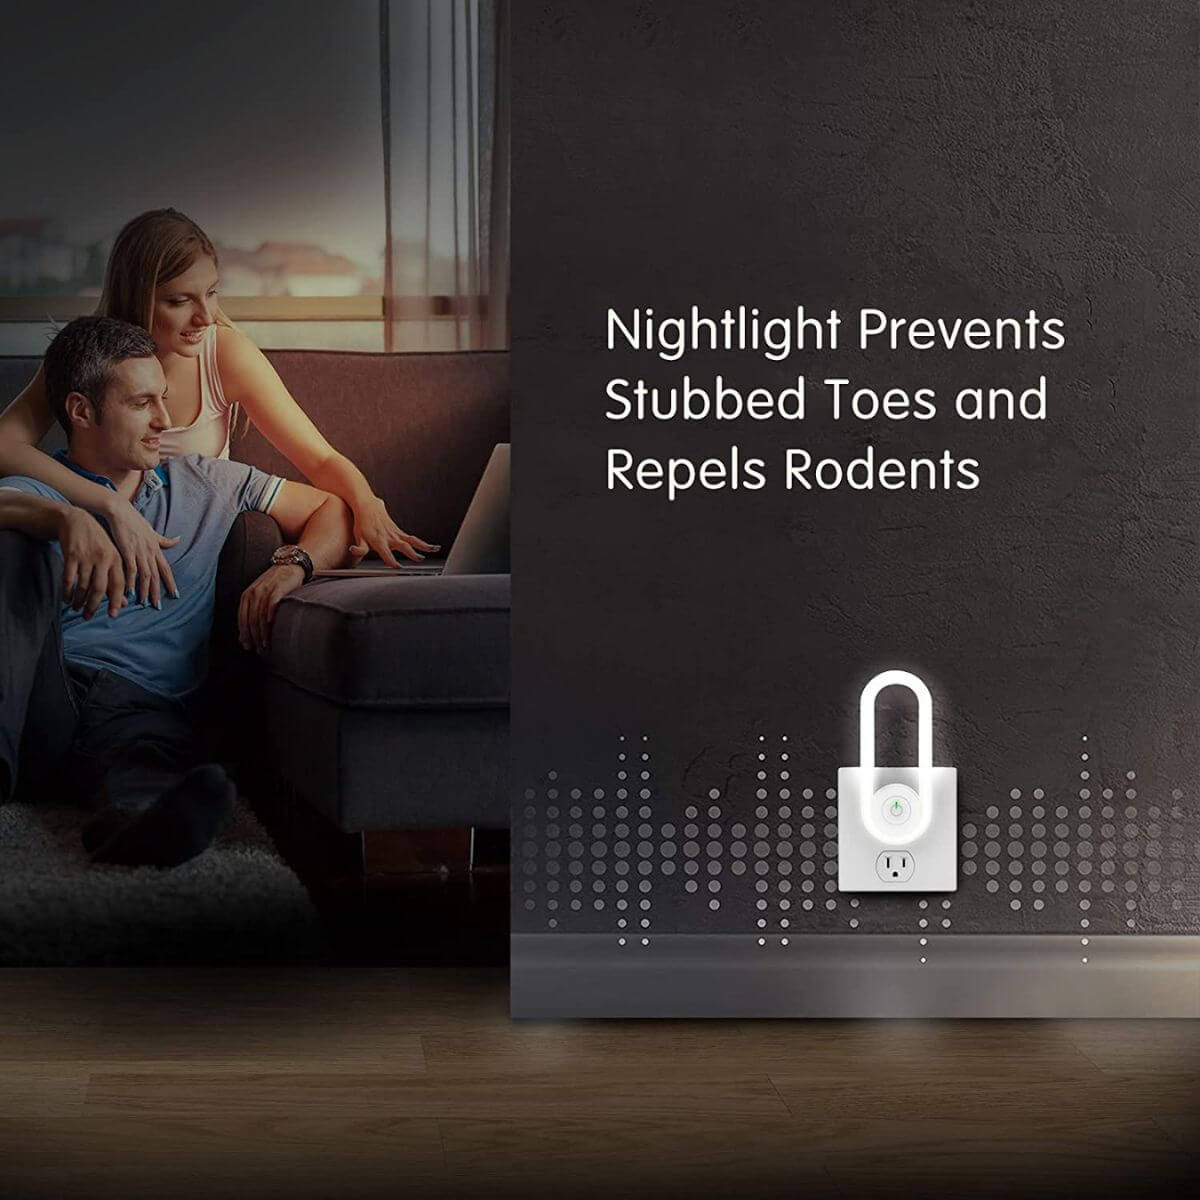 Nightlight prevents stubbed toes and repels rodents while couple looks at laptop on a couch